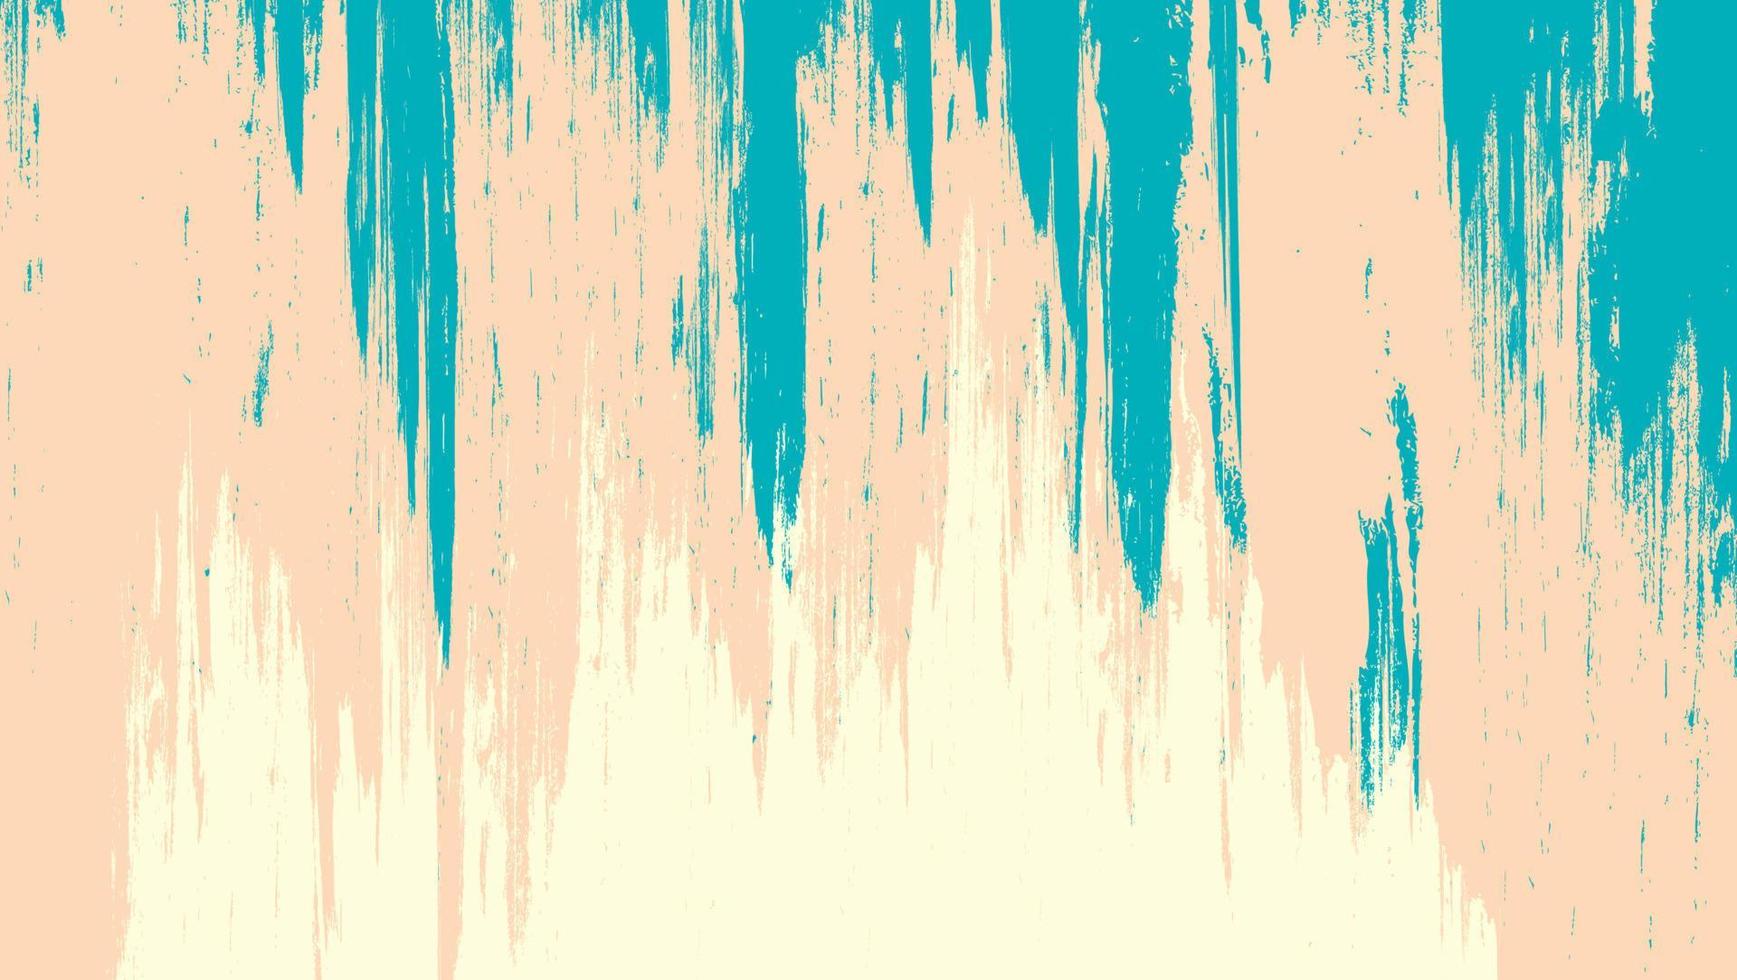 Drawing Abstract Grunge Texture Design In Pastel Color vector